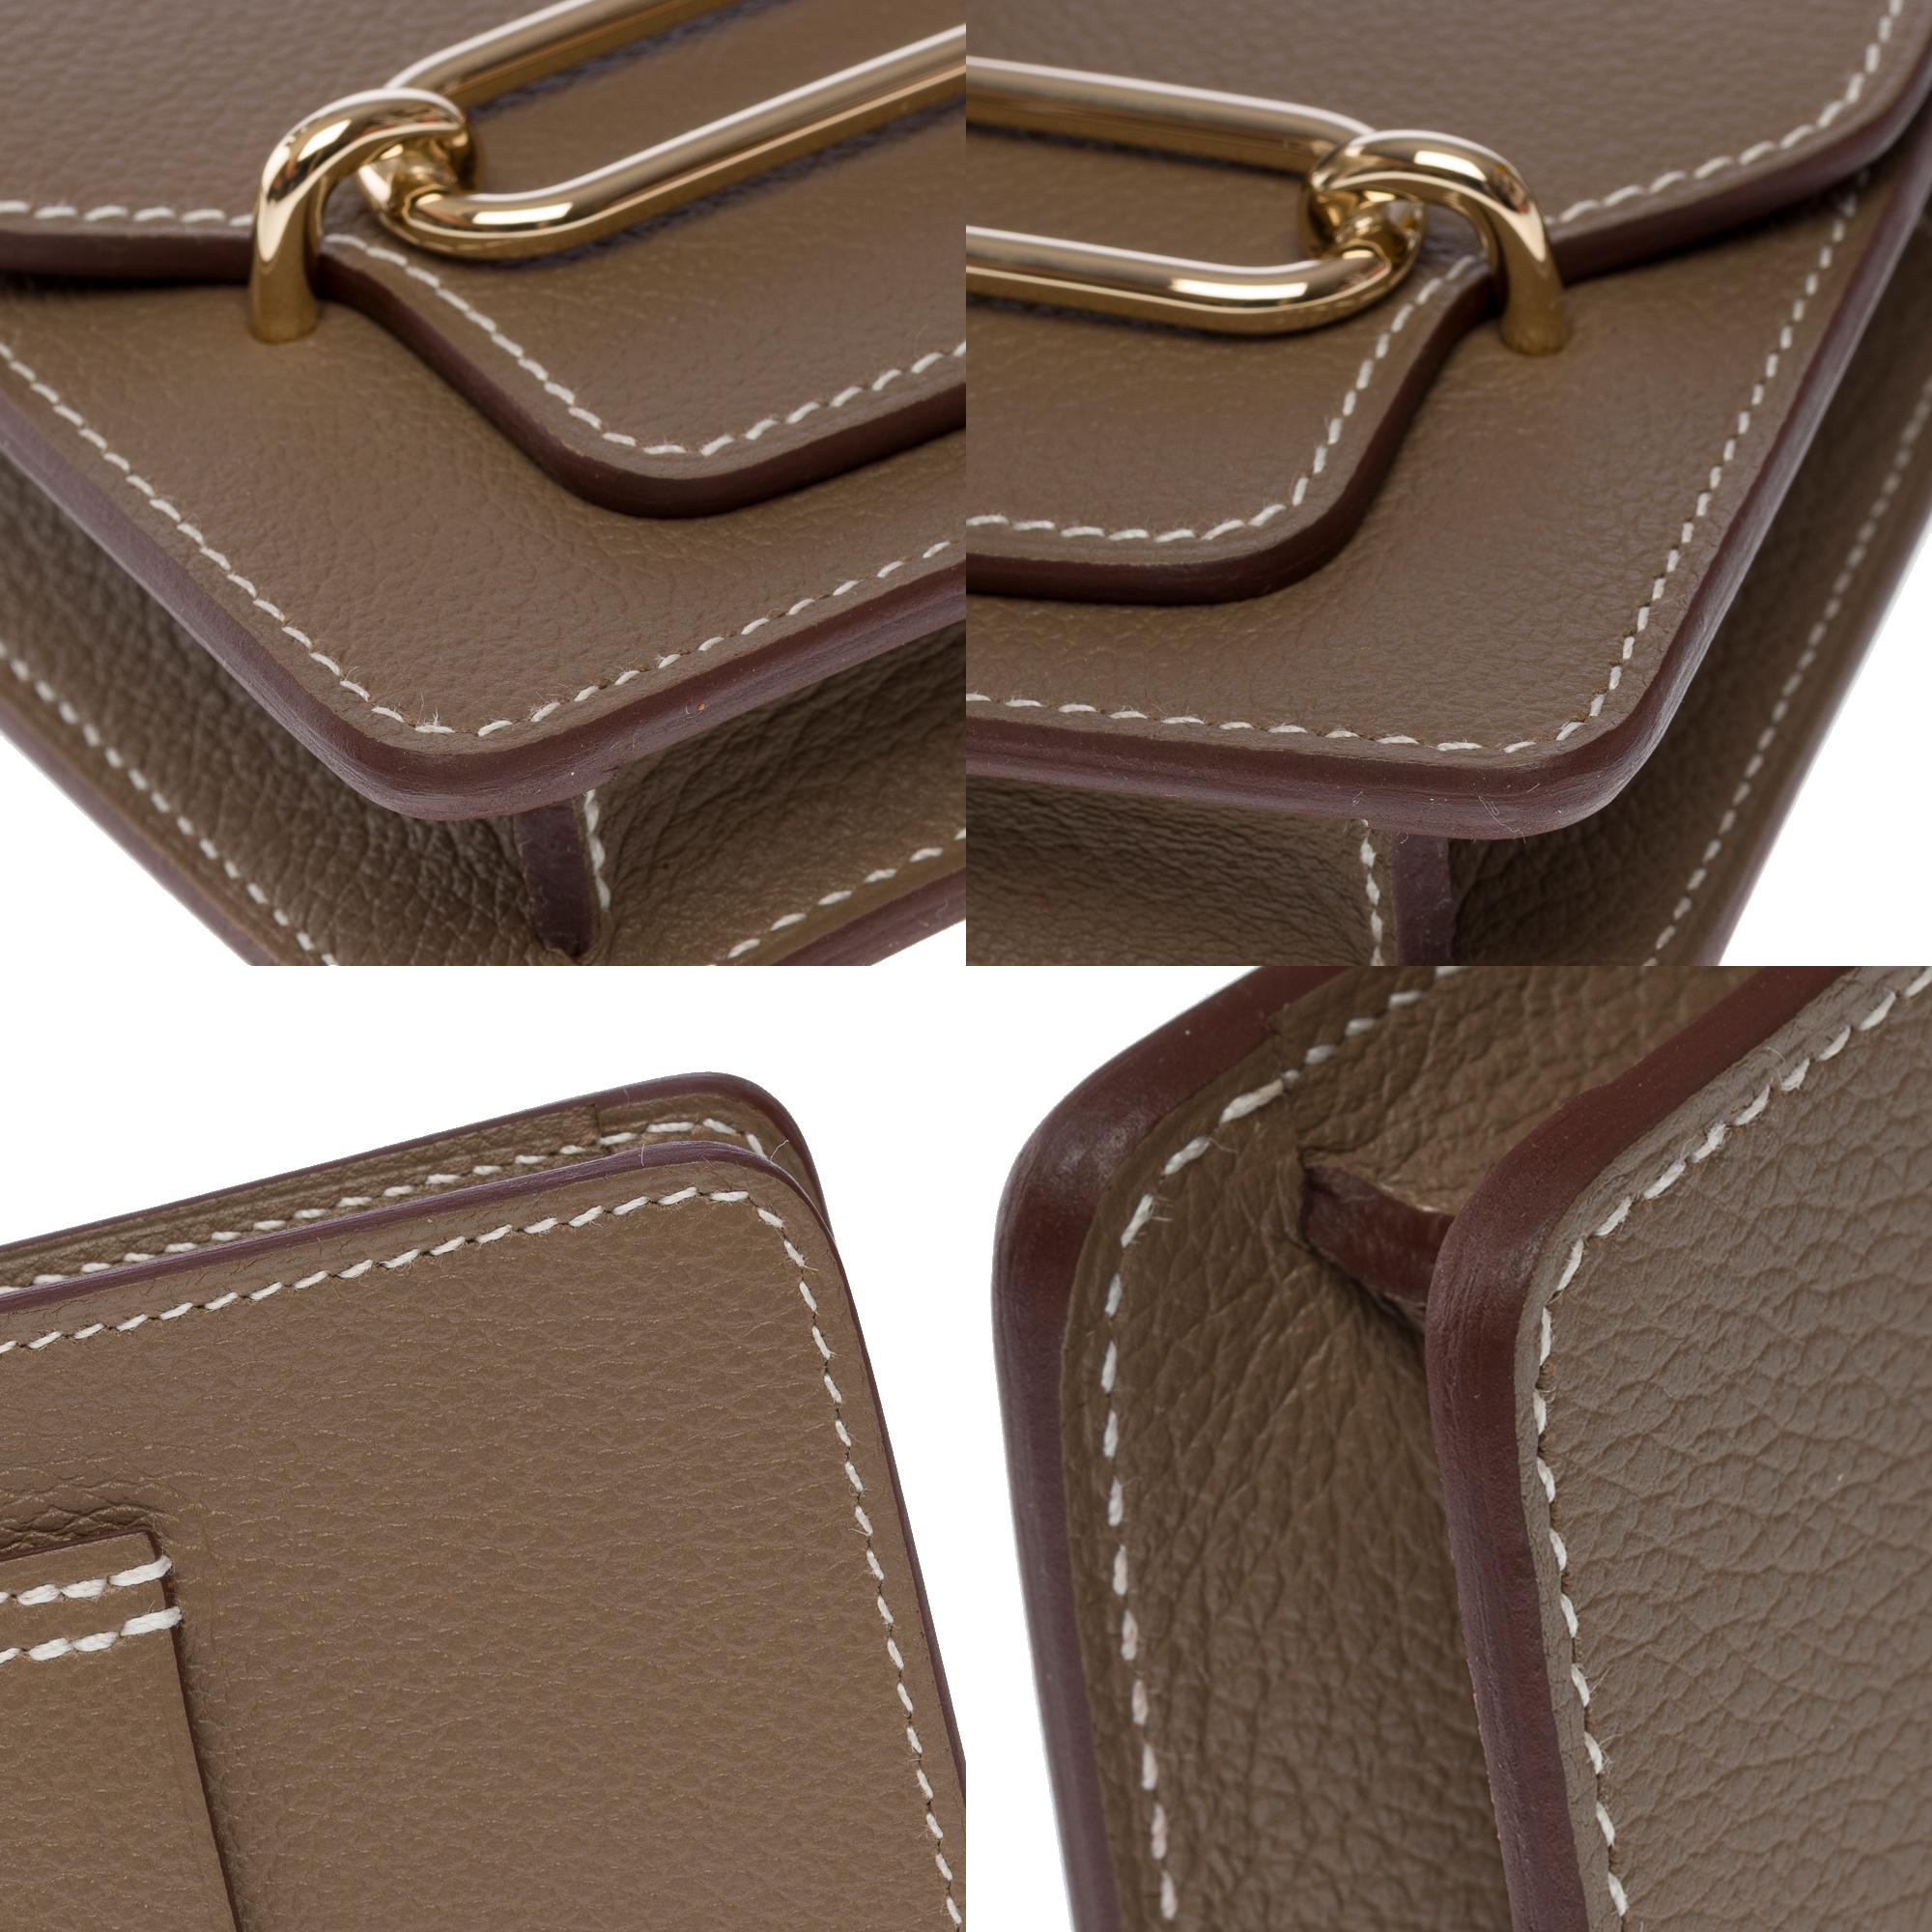 Beautiful New Hermès Roulis Slim Compact Wallet in Etoupe Evercolor leather, GHW For Sale 8